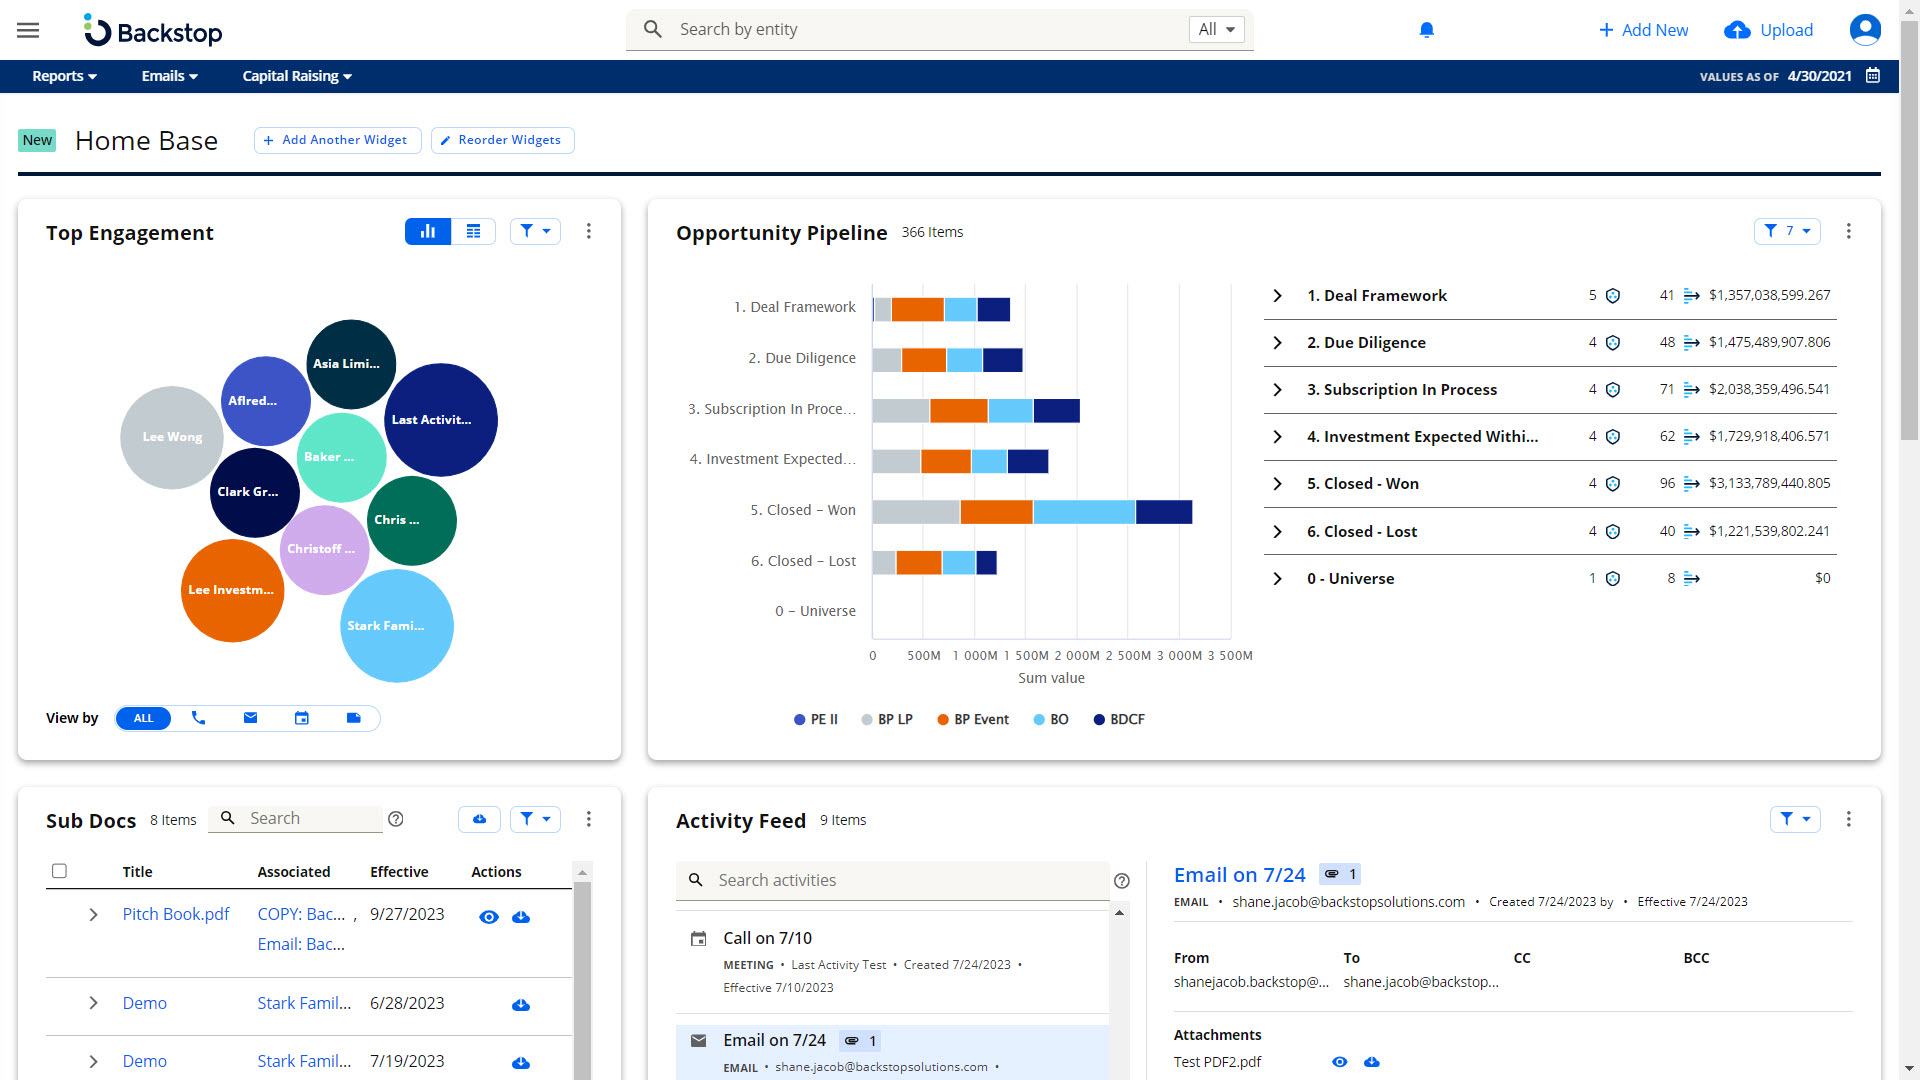 Client Service Insights at Your Fingertips - A new way to start and end your day with key insights into your top investor interactions, opportunities, activity, and more on Backstop Home Base. Showcase all the efforts you and your team bring to the firm. 